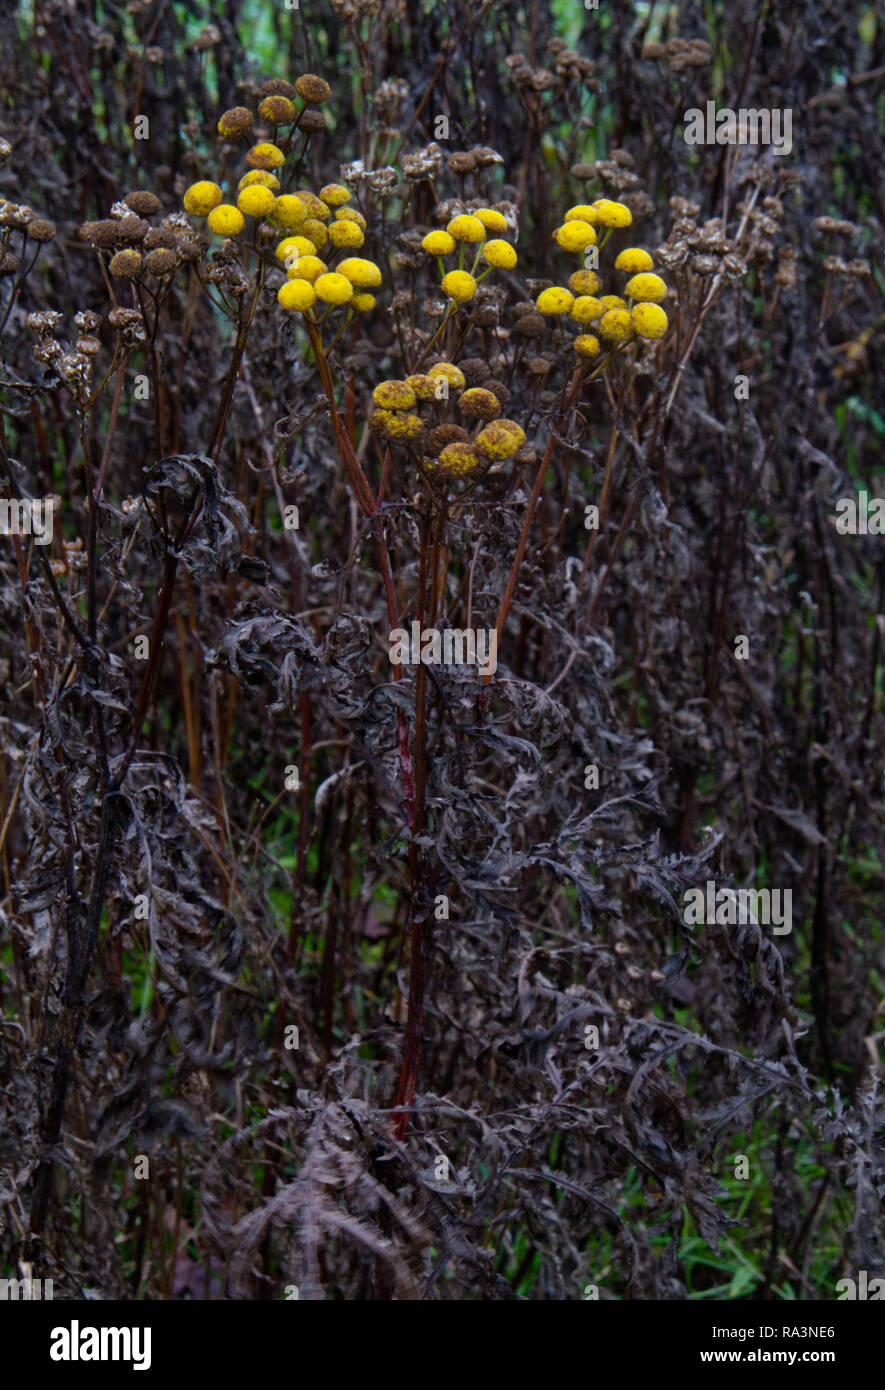 Withered Tansy plants, still some yellow flowers, but the leaves are dead and brown Stock Photo